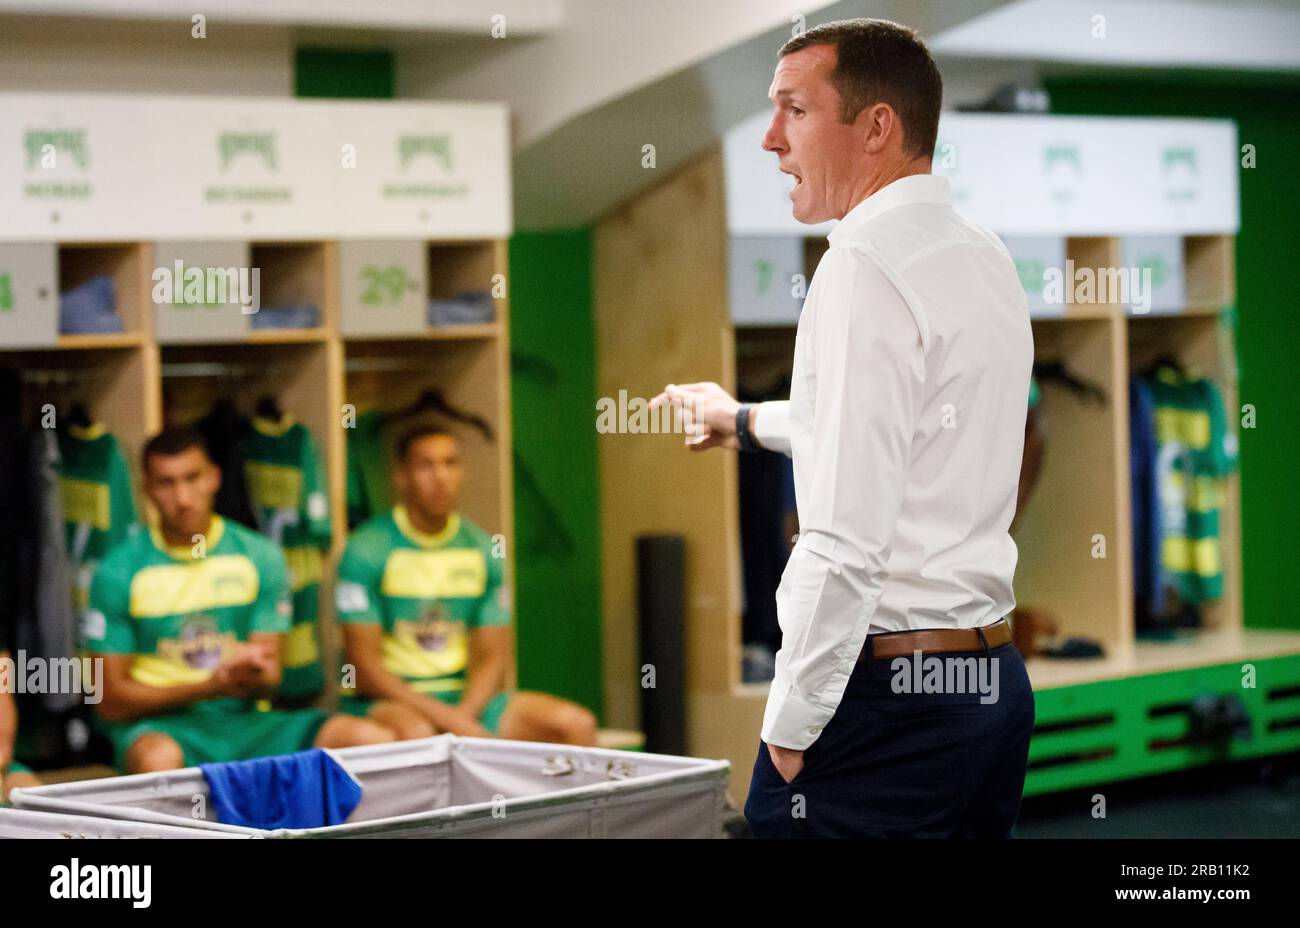 MARCH 16, 2019 - ST. PETERSBURG, FLORIDA: Tampa Bay Rowdies Head Coach Neill Collins addresses his team before a match versus Pittsburgh Riverhounds at Al Lang Stadium. Collins was named the Head Coach at Barnsley F.C. on July 6, 2023. Stock Photo